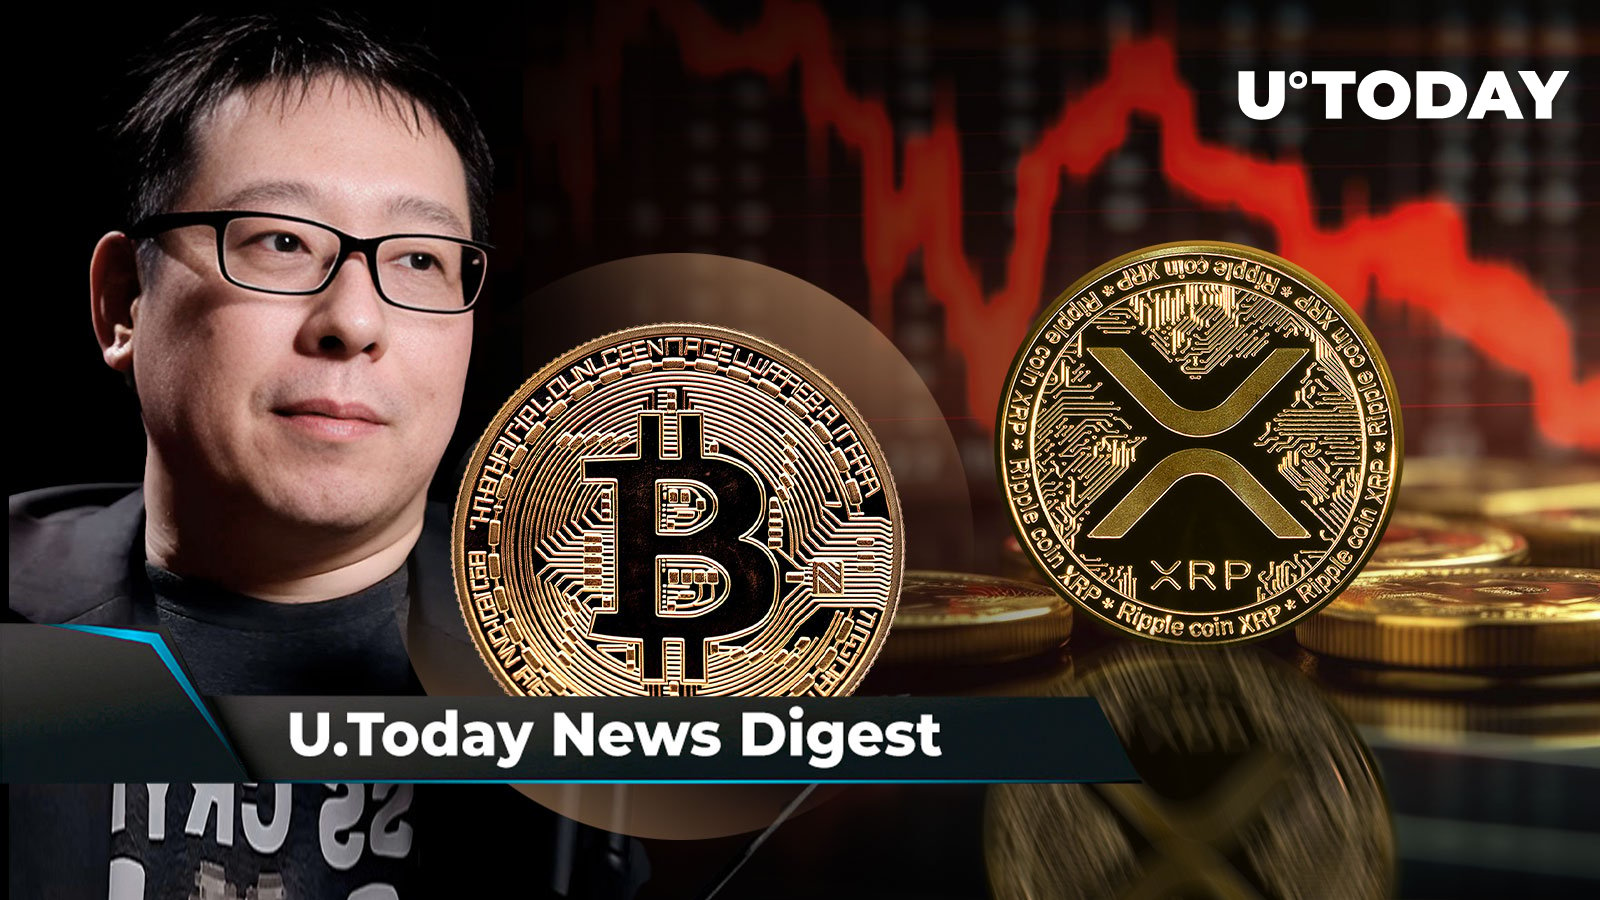 XRP at Center of Heated Debate, Samson Mow Makes Crucial Bitcoin Statement, Shiba Inu About to Break 1.3 Trillion SHIB Resistance: Crypto News Digest by U.Today